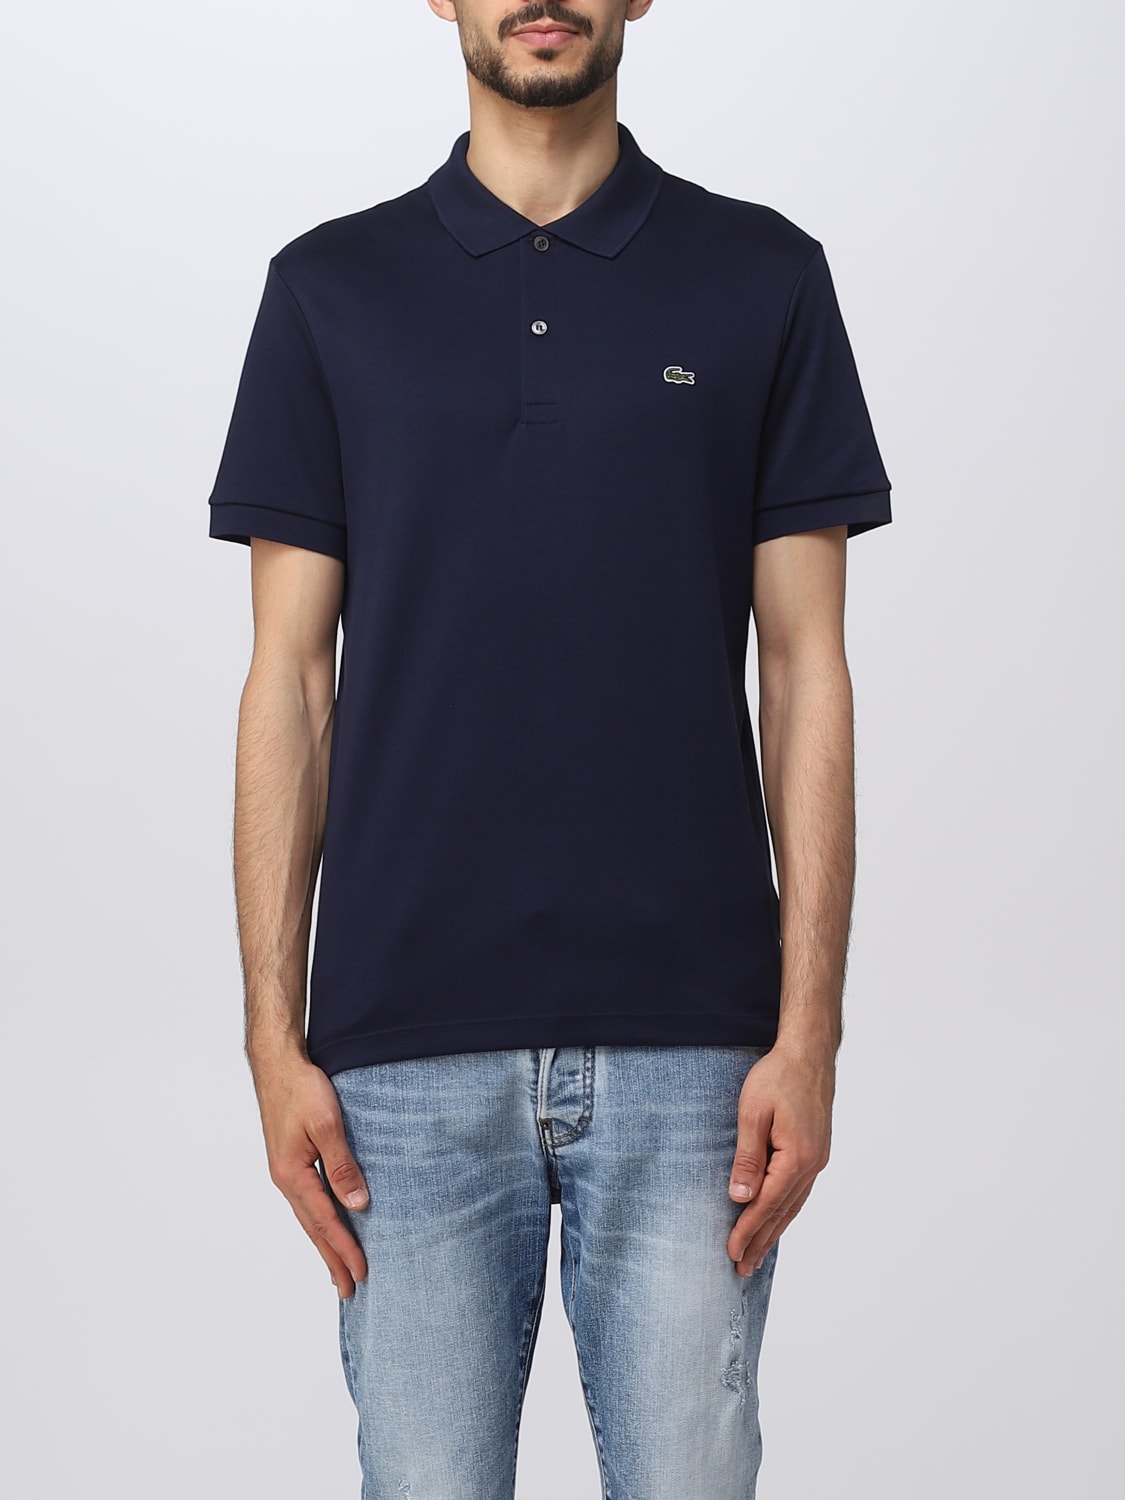 LACOSTE: shirt for man - Navy | Lacoste polo shirt DH2050 on GIGLIO.COM